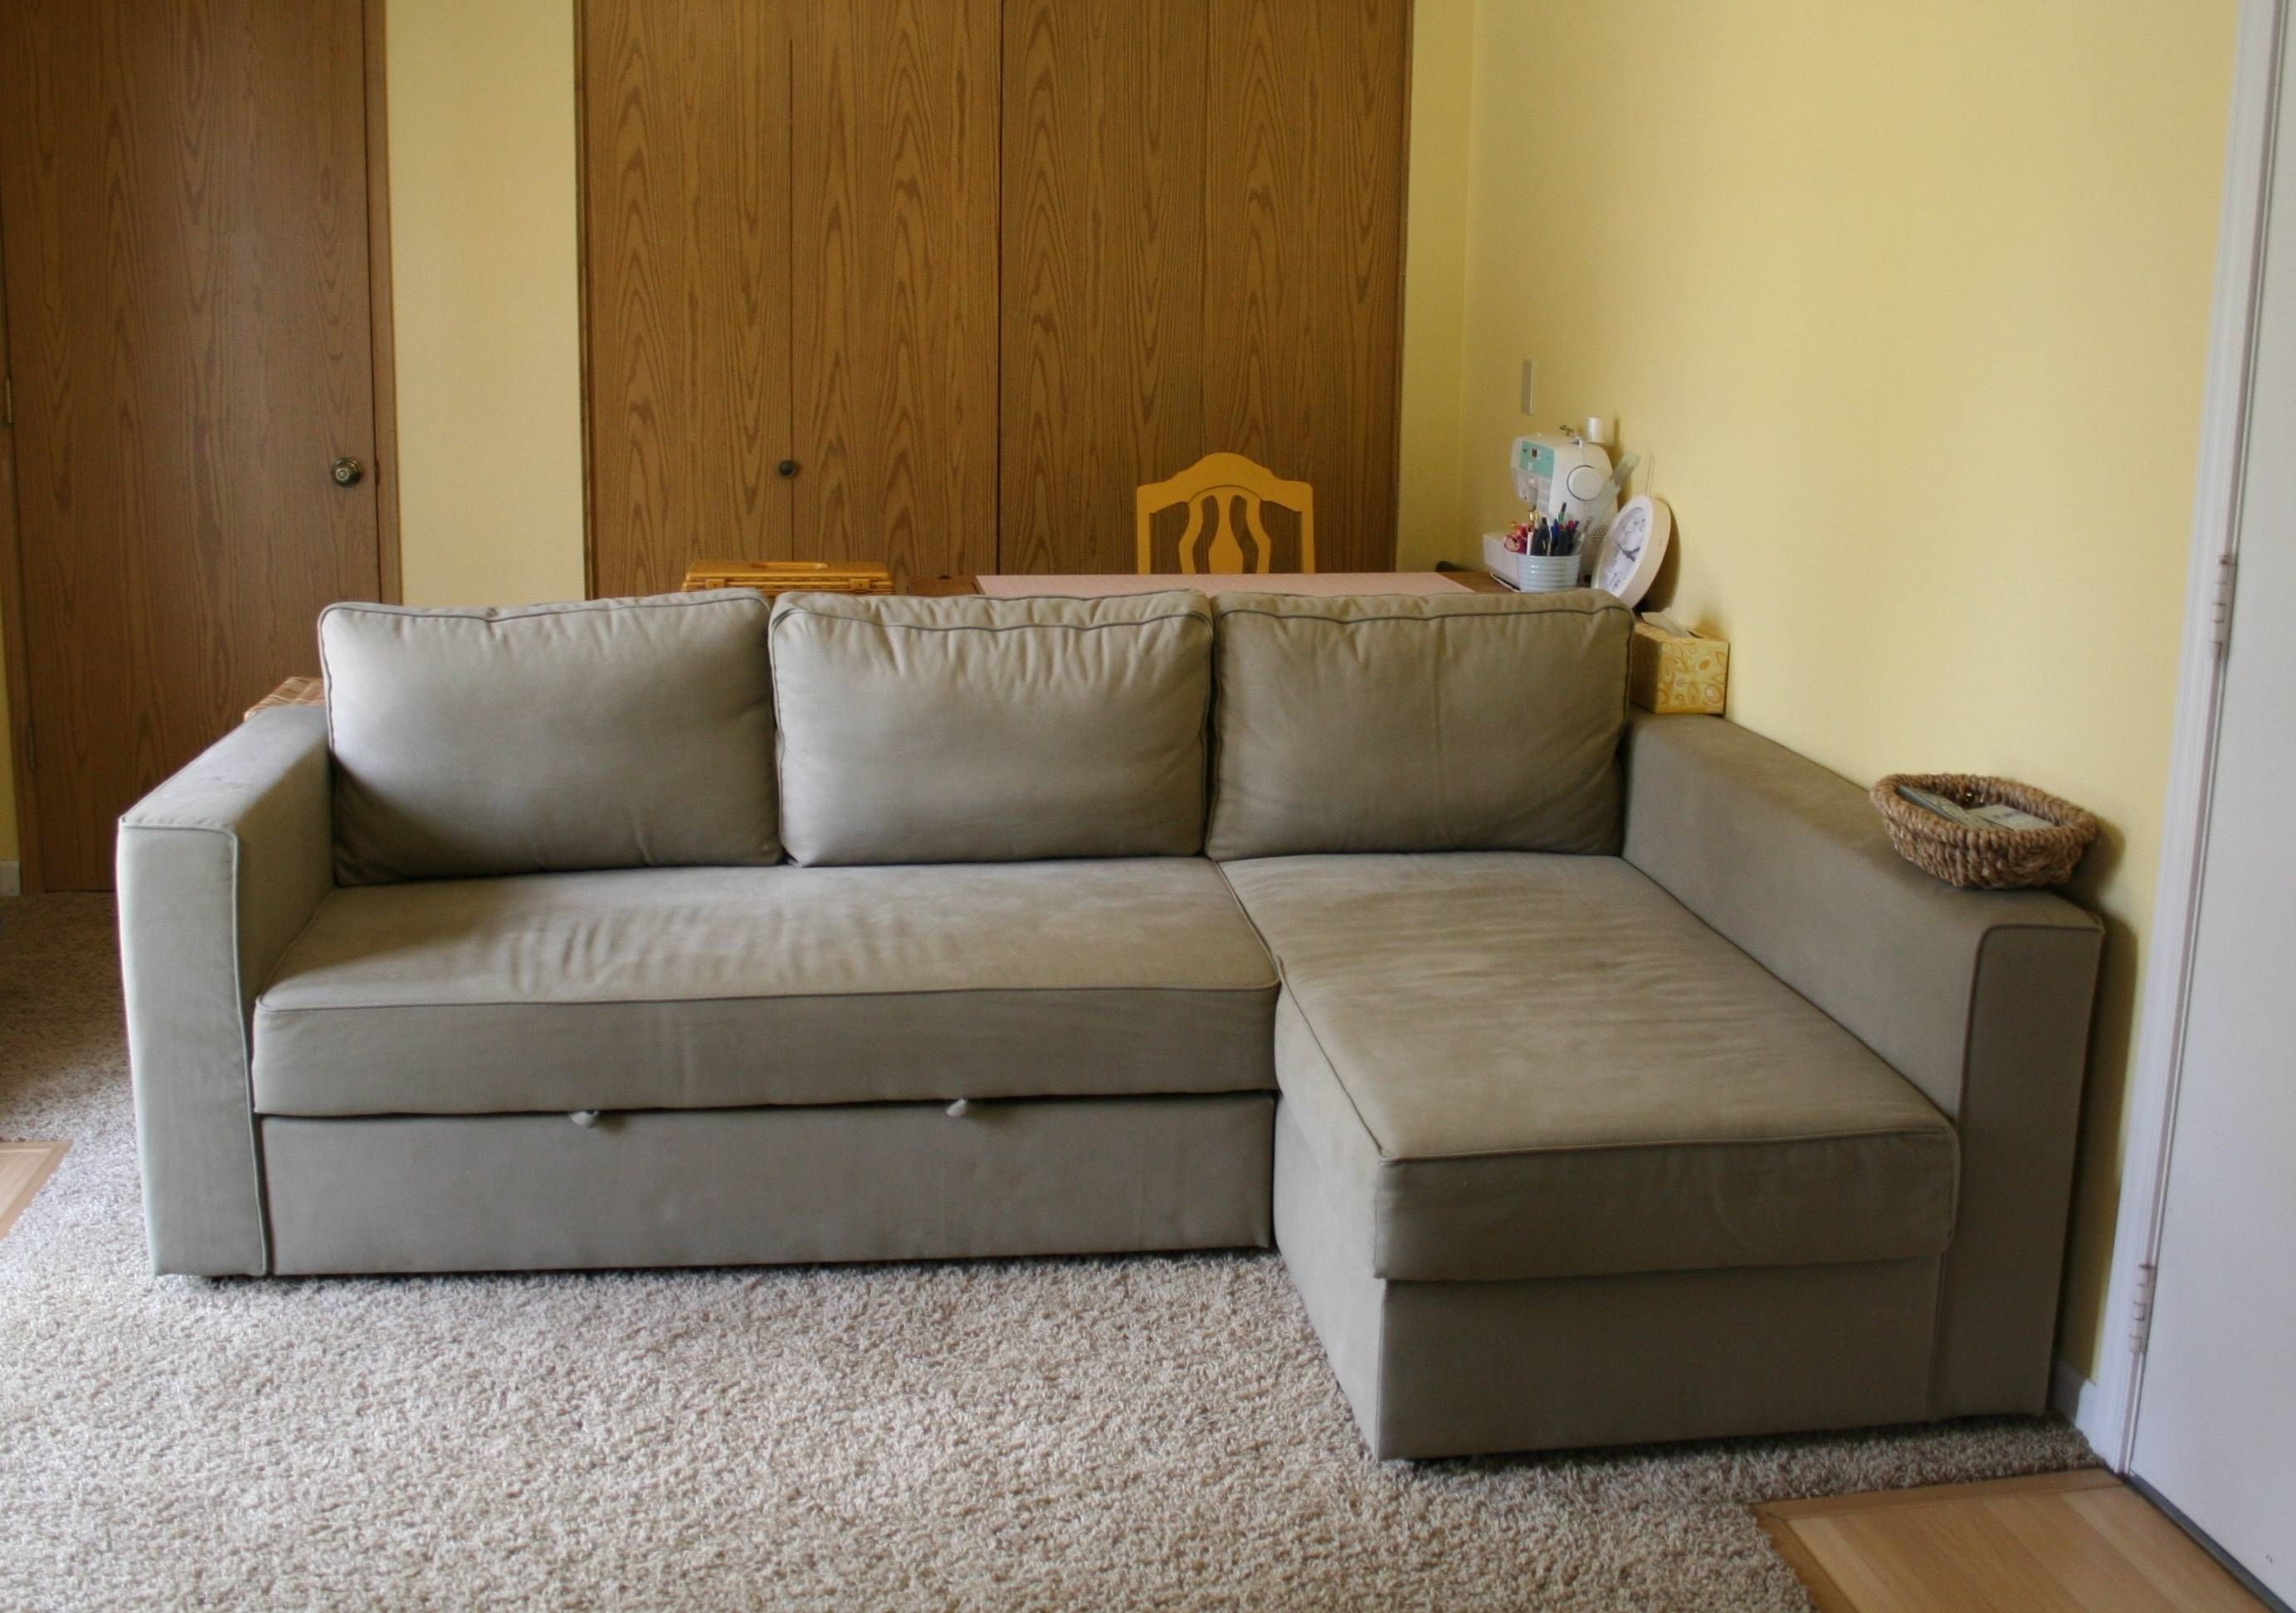 ikea manstad sectional sofa bed